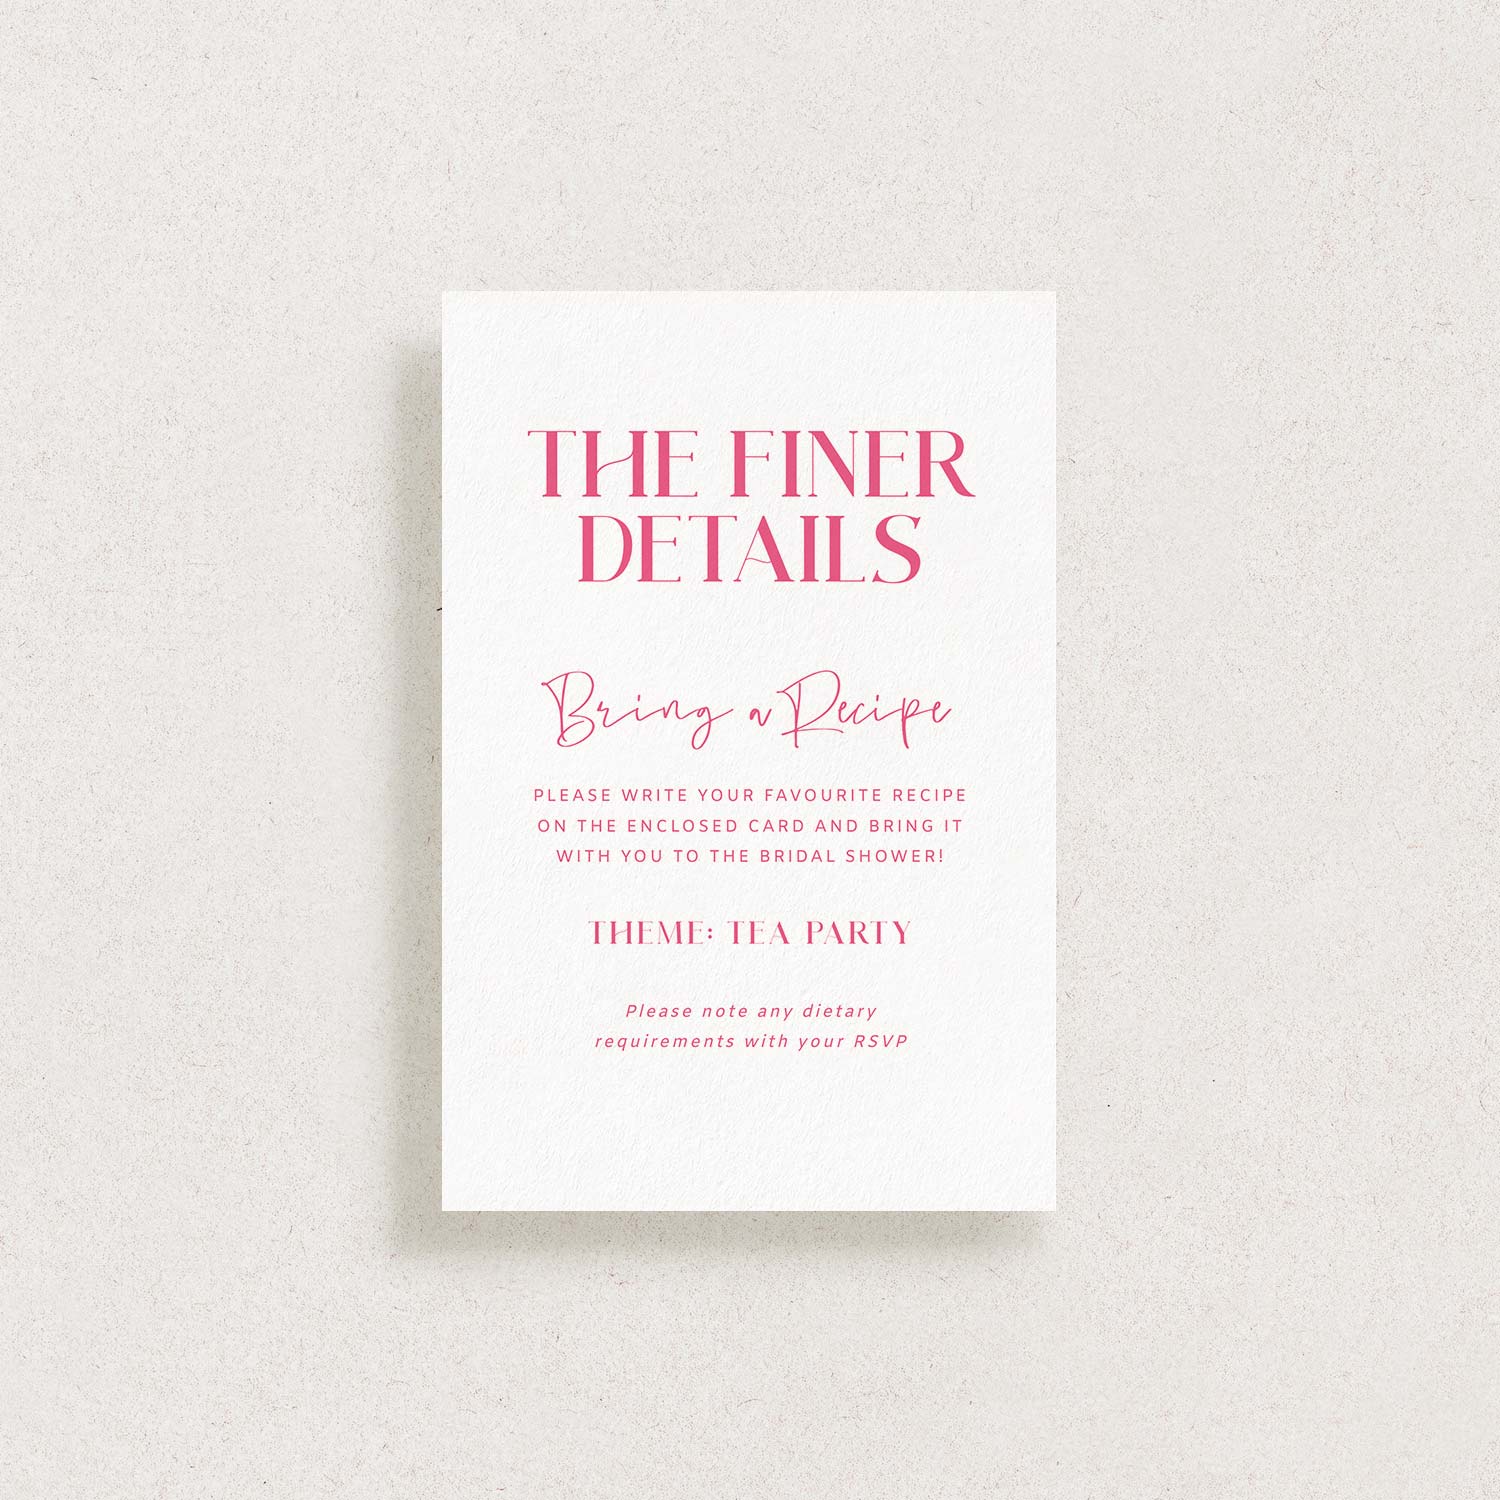 Bridal Shower Details Card Template, PRETTY IN PINK